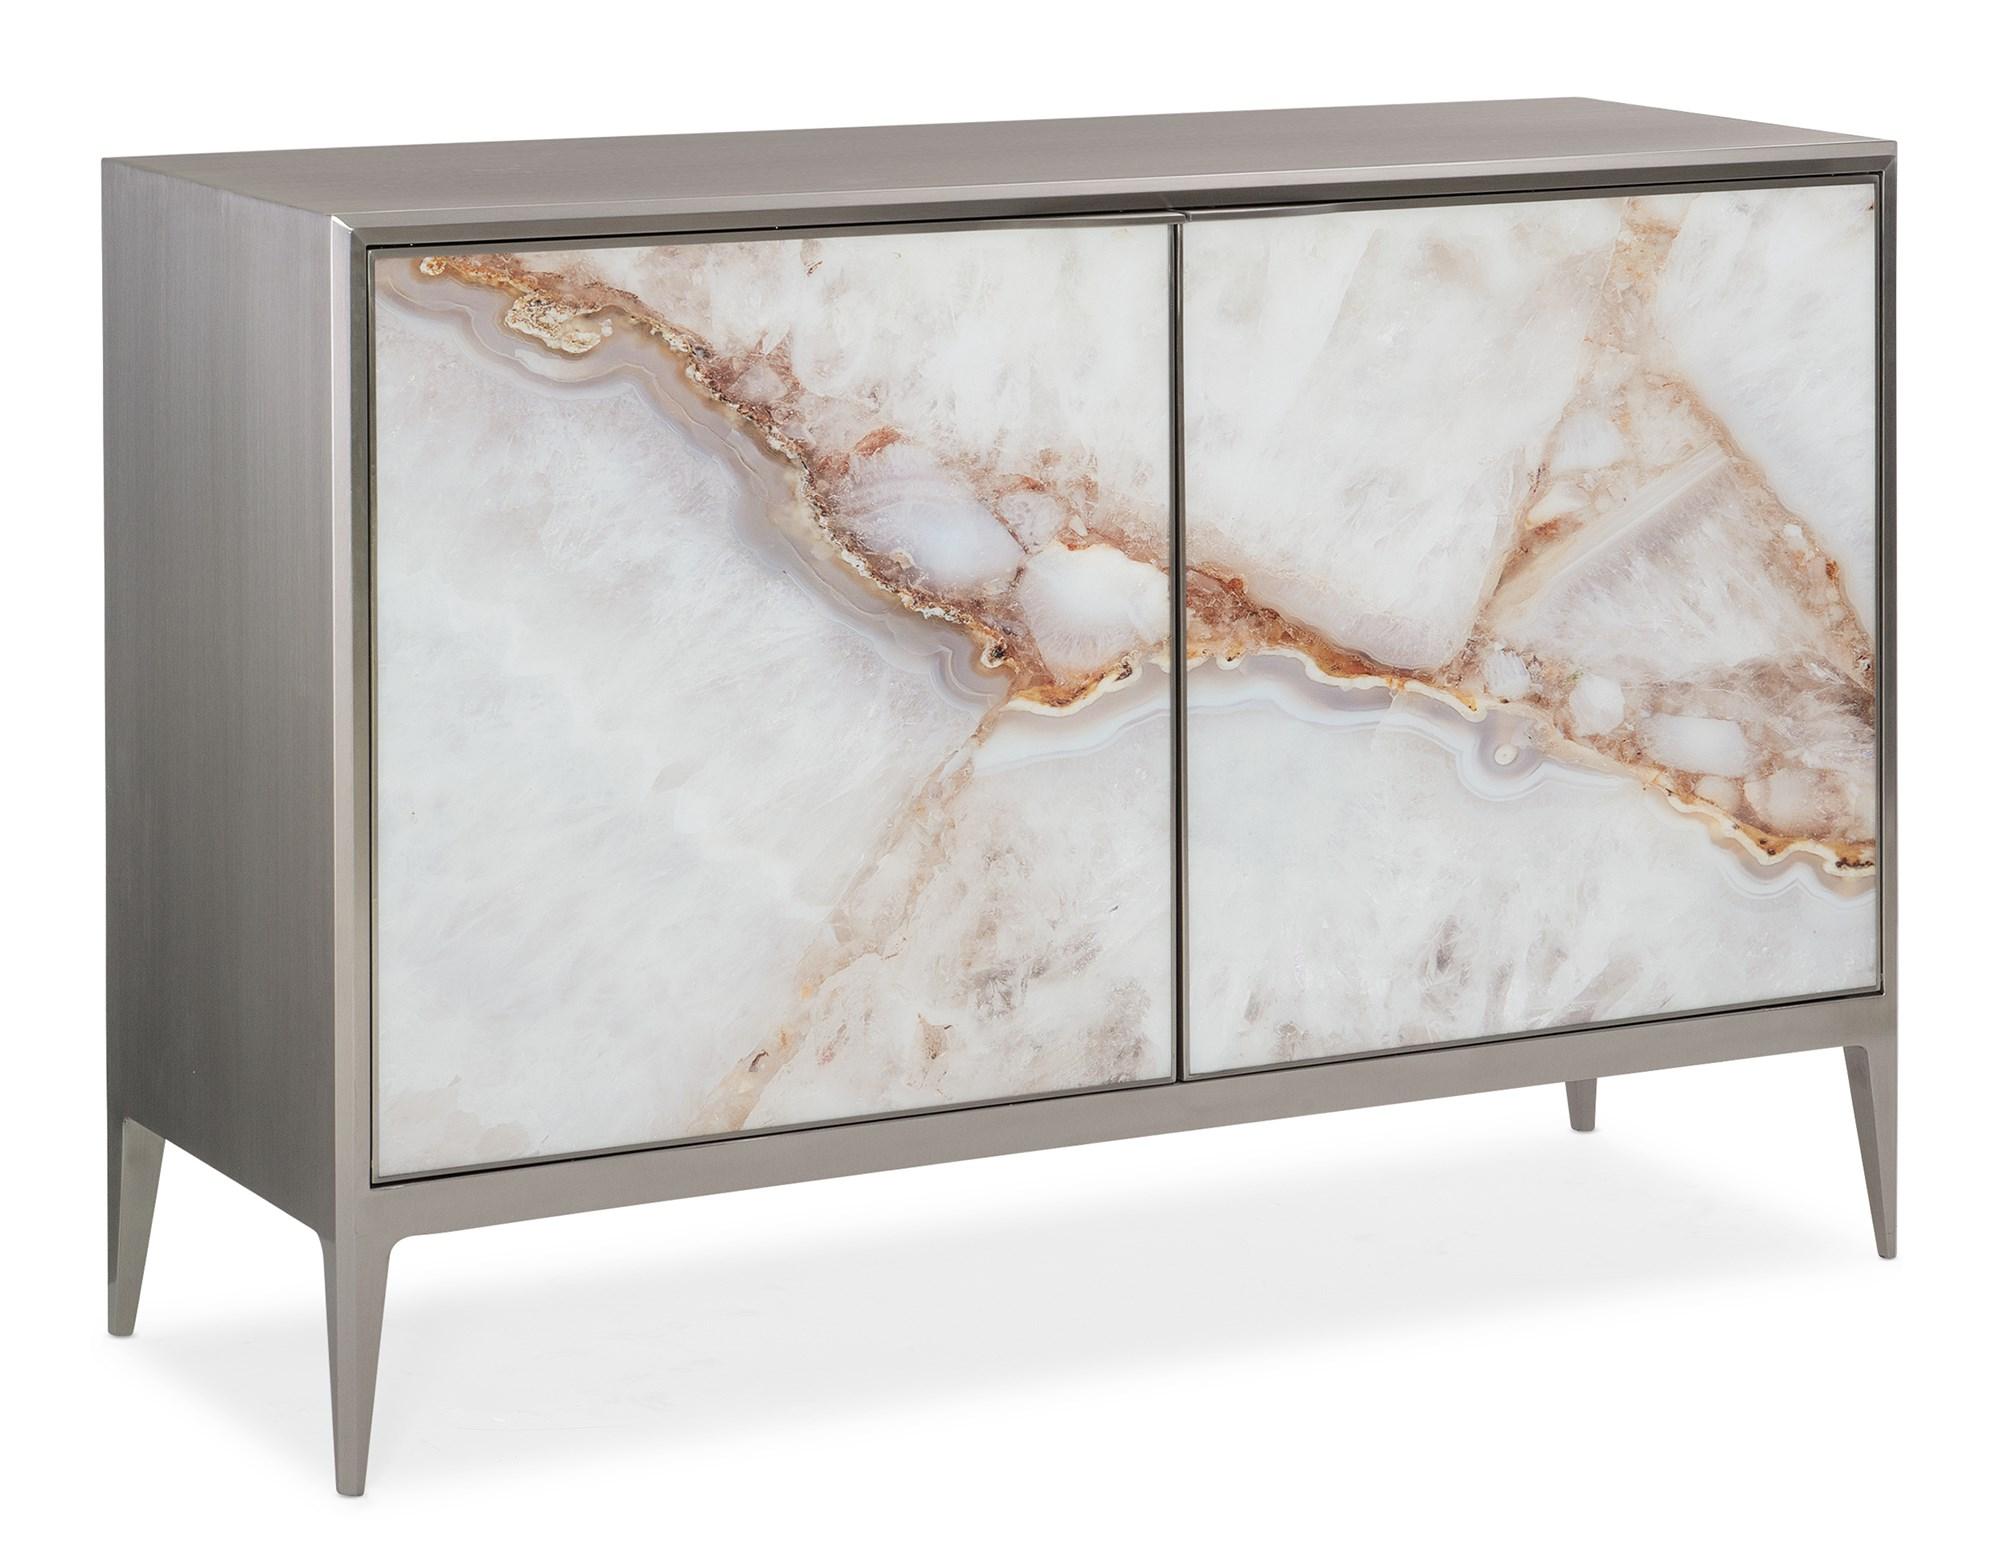 Contemporary Cabinet ROCK STEADY CLA-019-462 in Natural, White 